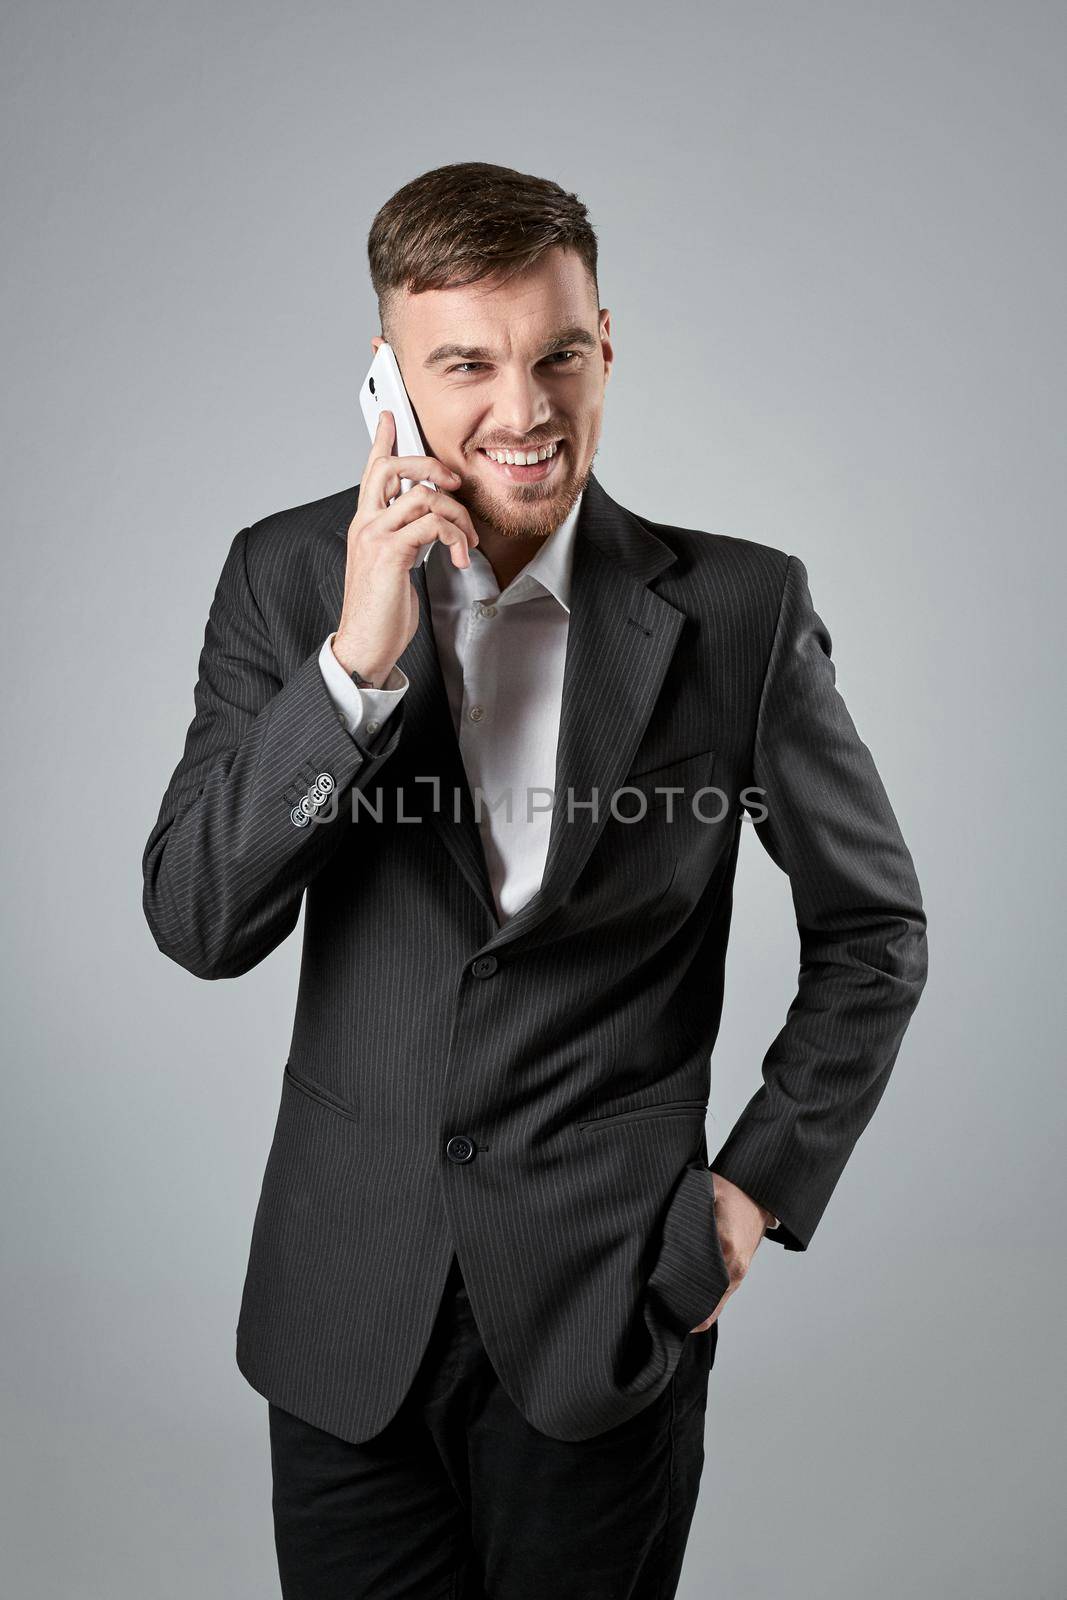 Portrait of a handsome businessman making a phone call against a grey background. Emotions